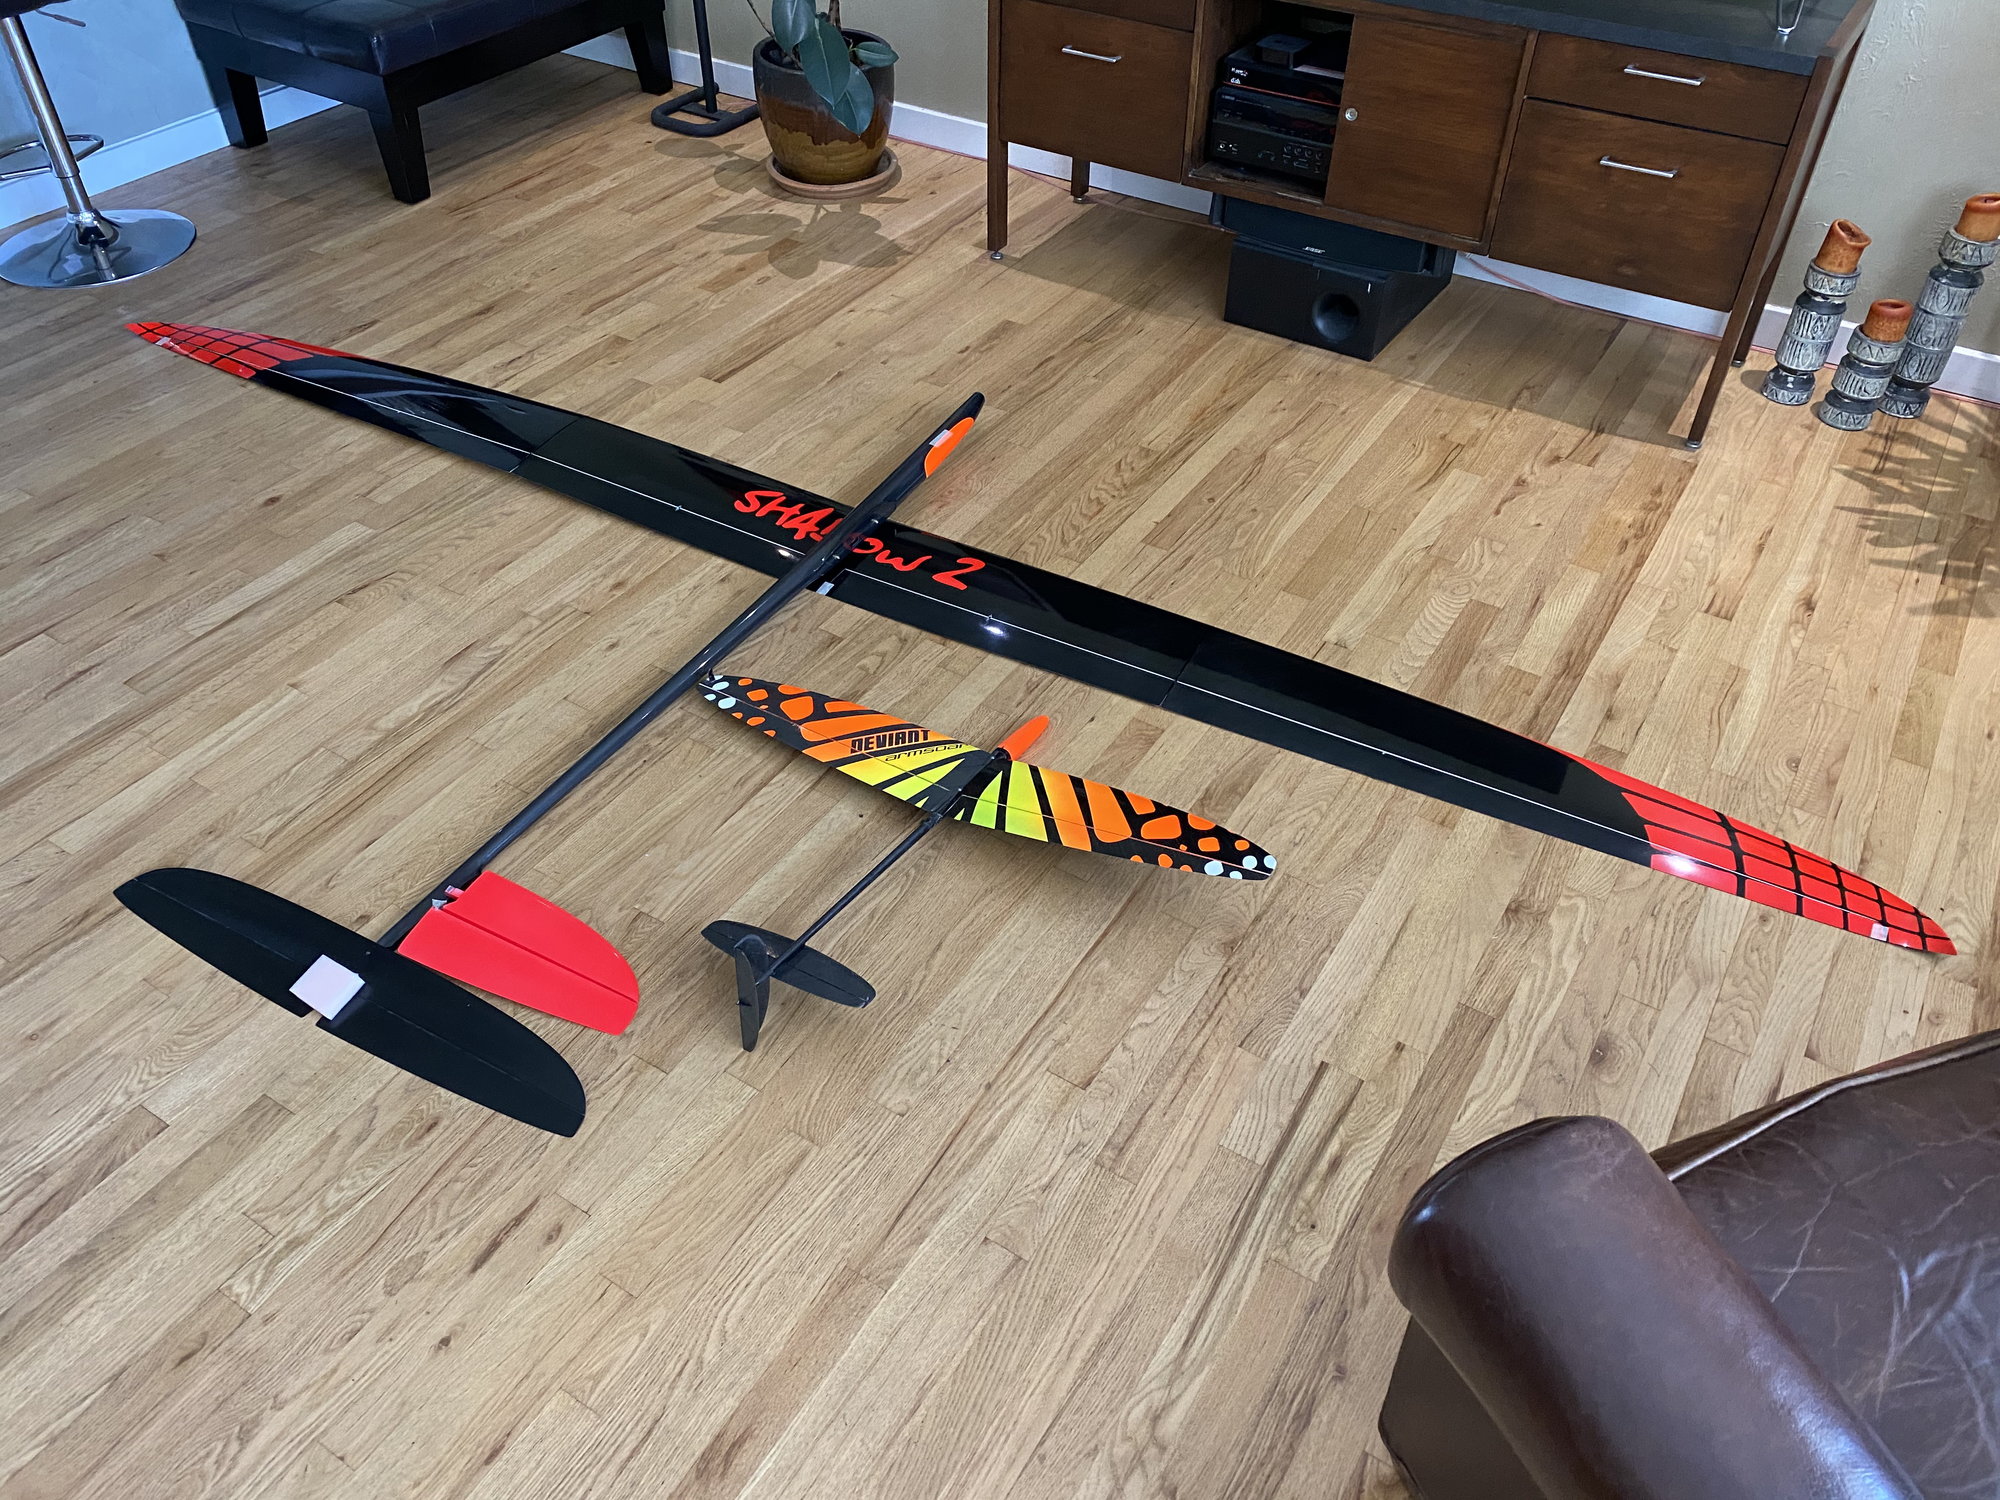 Great Planes Tori 2m EP Glider Rx-r GPMA1819 for sale online 